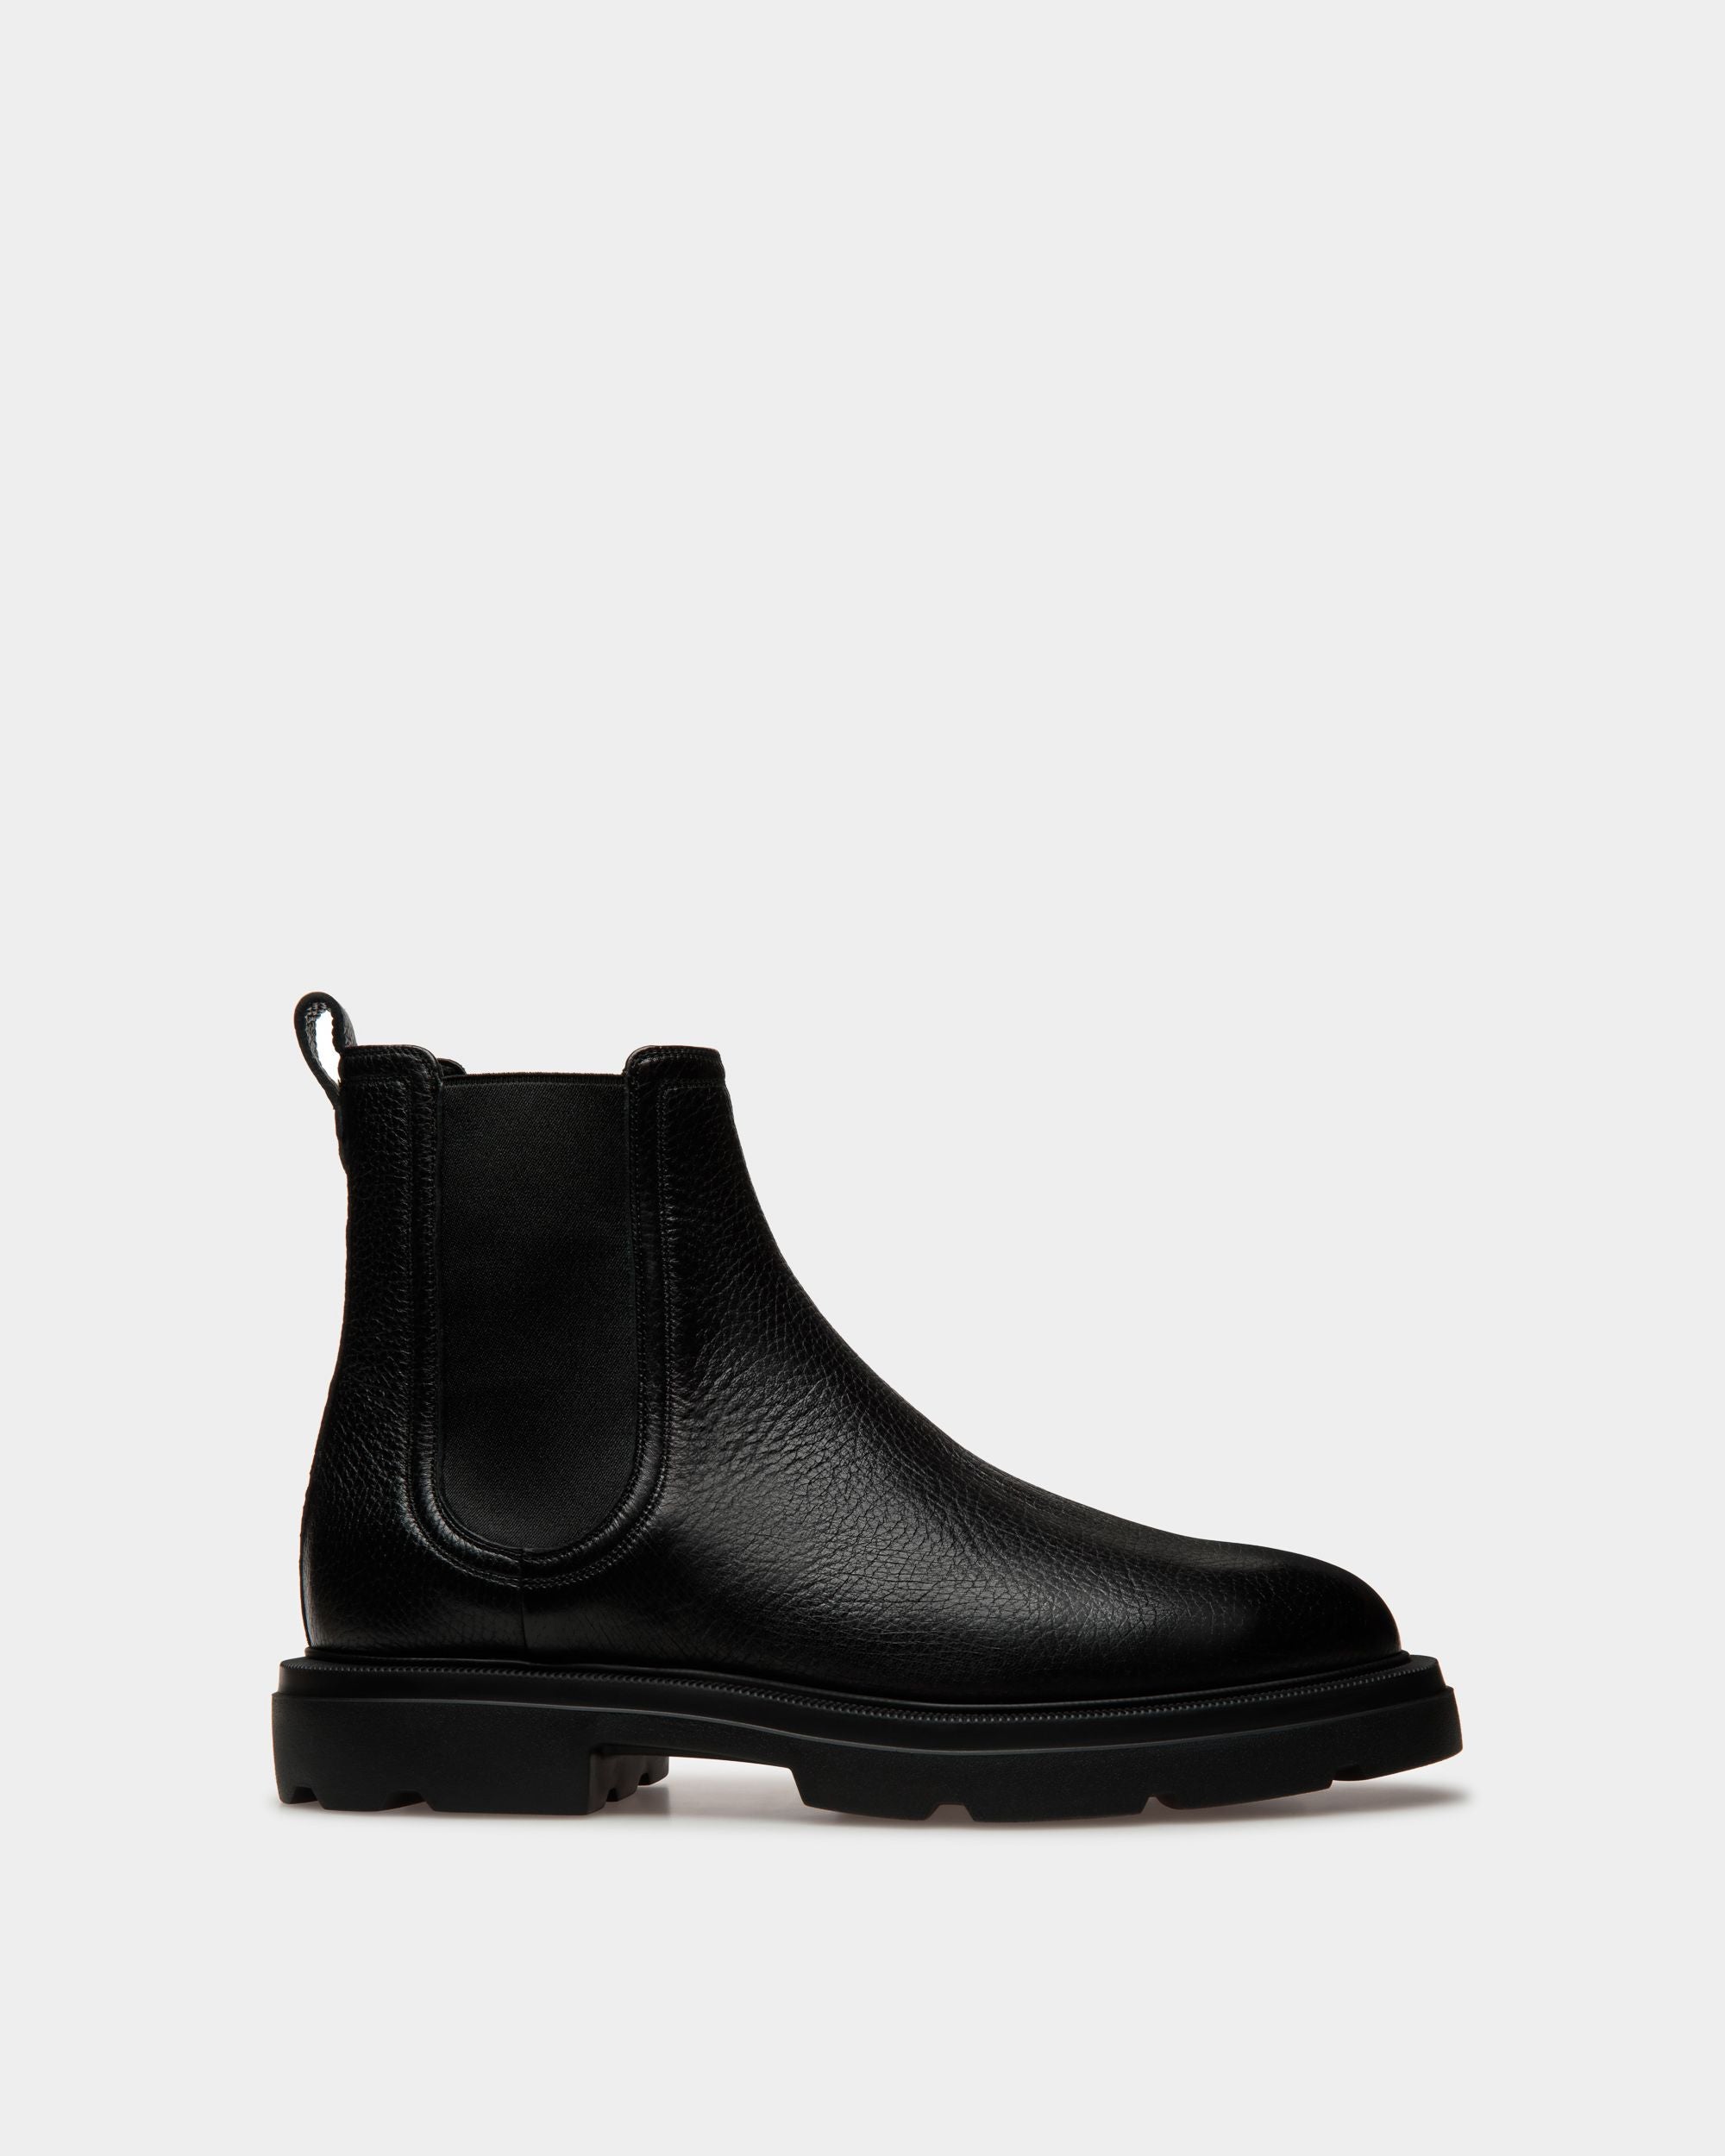 Zurich Booties | Men's Shoes | Black Leather | Bally | Still Life Side